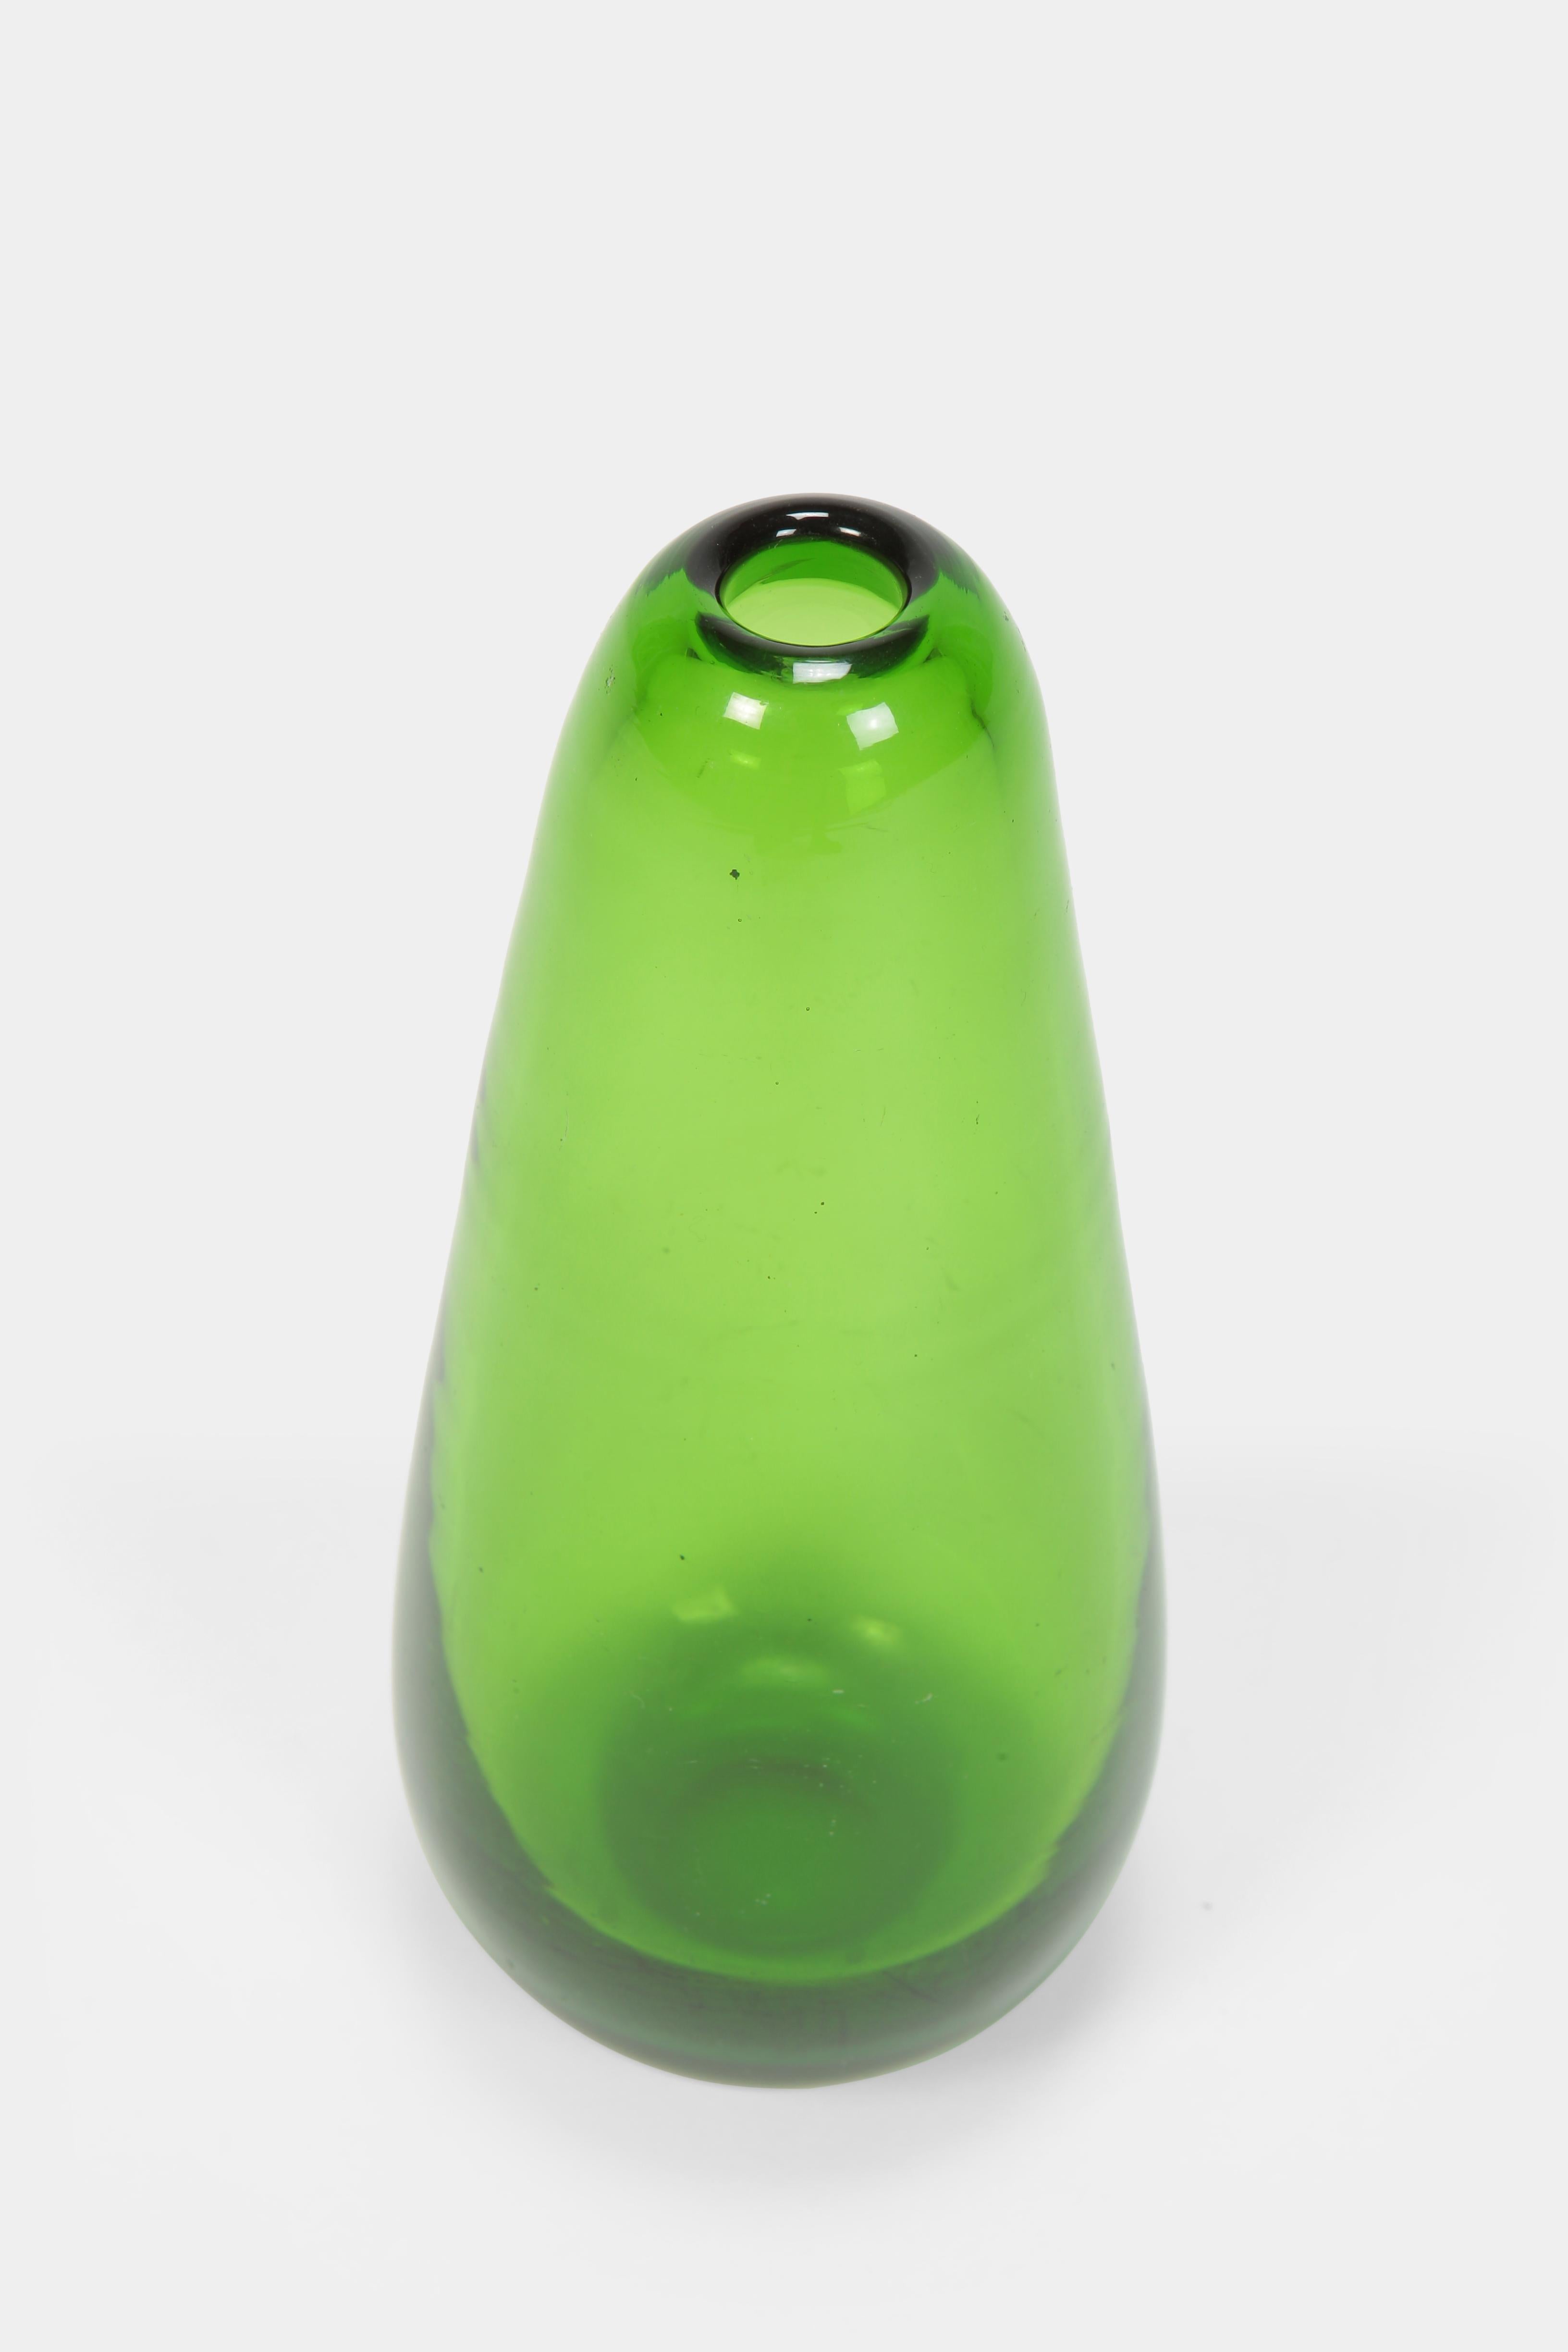 Beautiful Wilhelm Wagenfeld vase manufactured by Jena Glass in the 1950s in Germany. Thick-walled vase made of green glass.